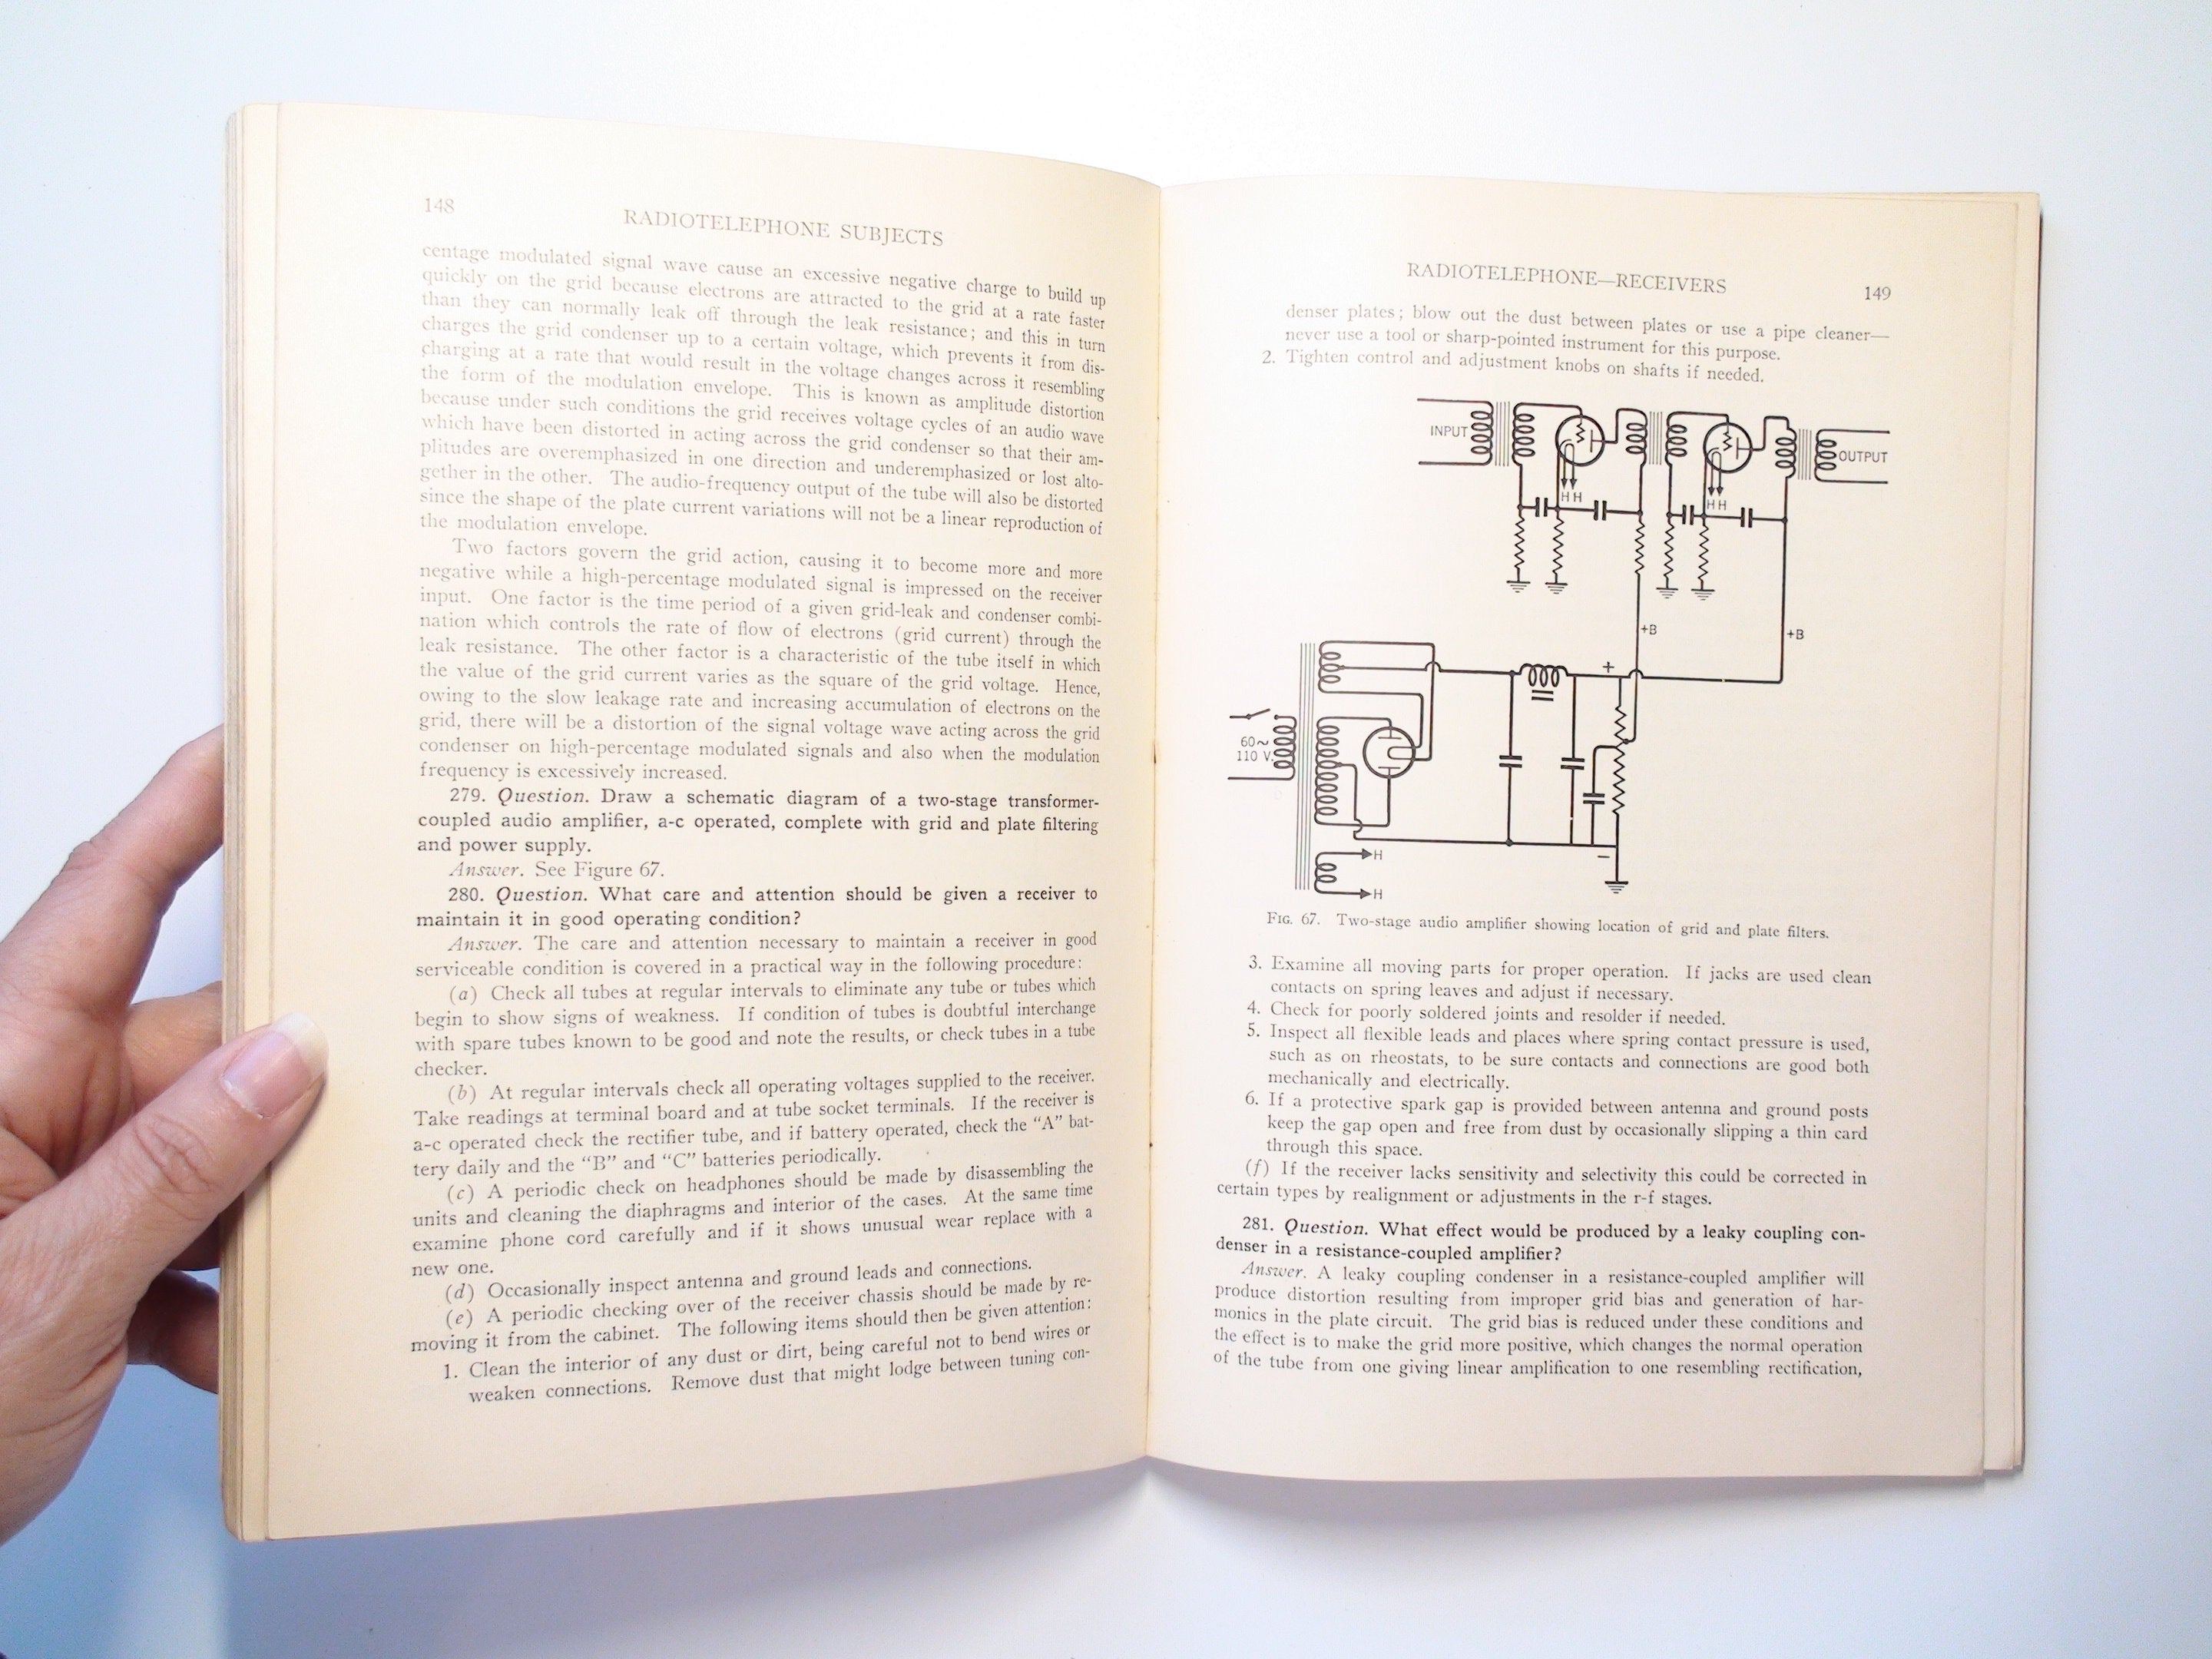 How to Pass Radio License Examinations, By Charles E. Drew, Illustrated, 1938